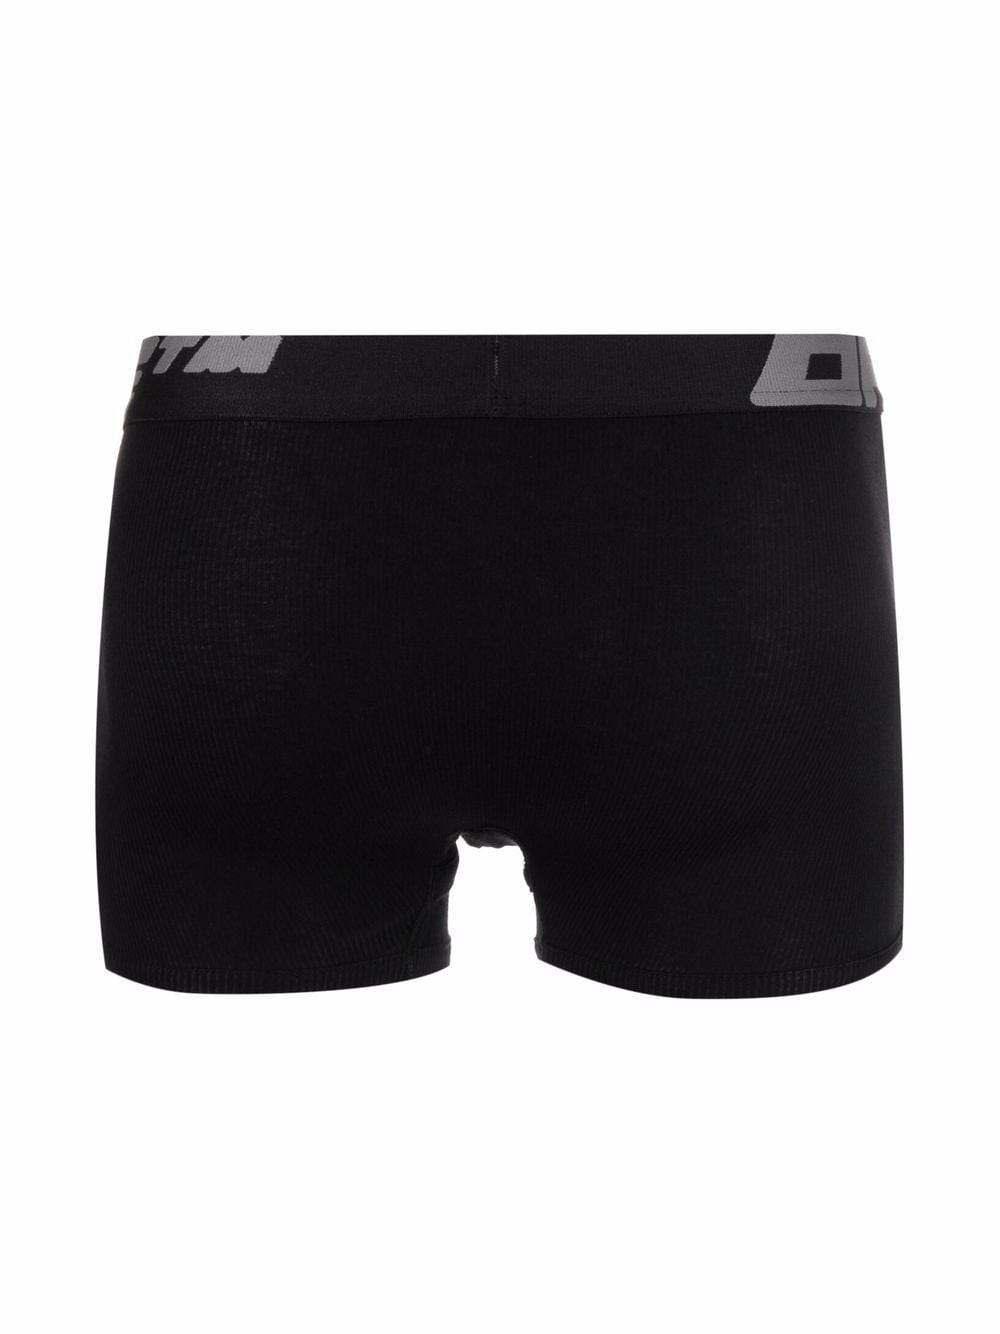 Off-White logo-waistband Boxers (3-pack) - Farfetch